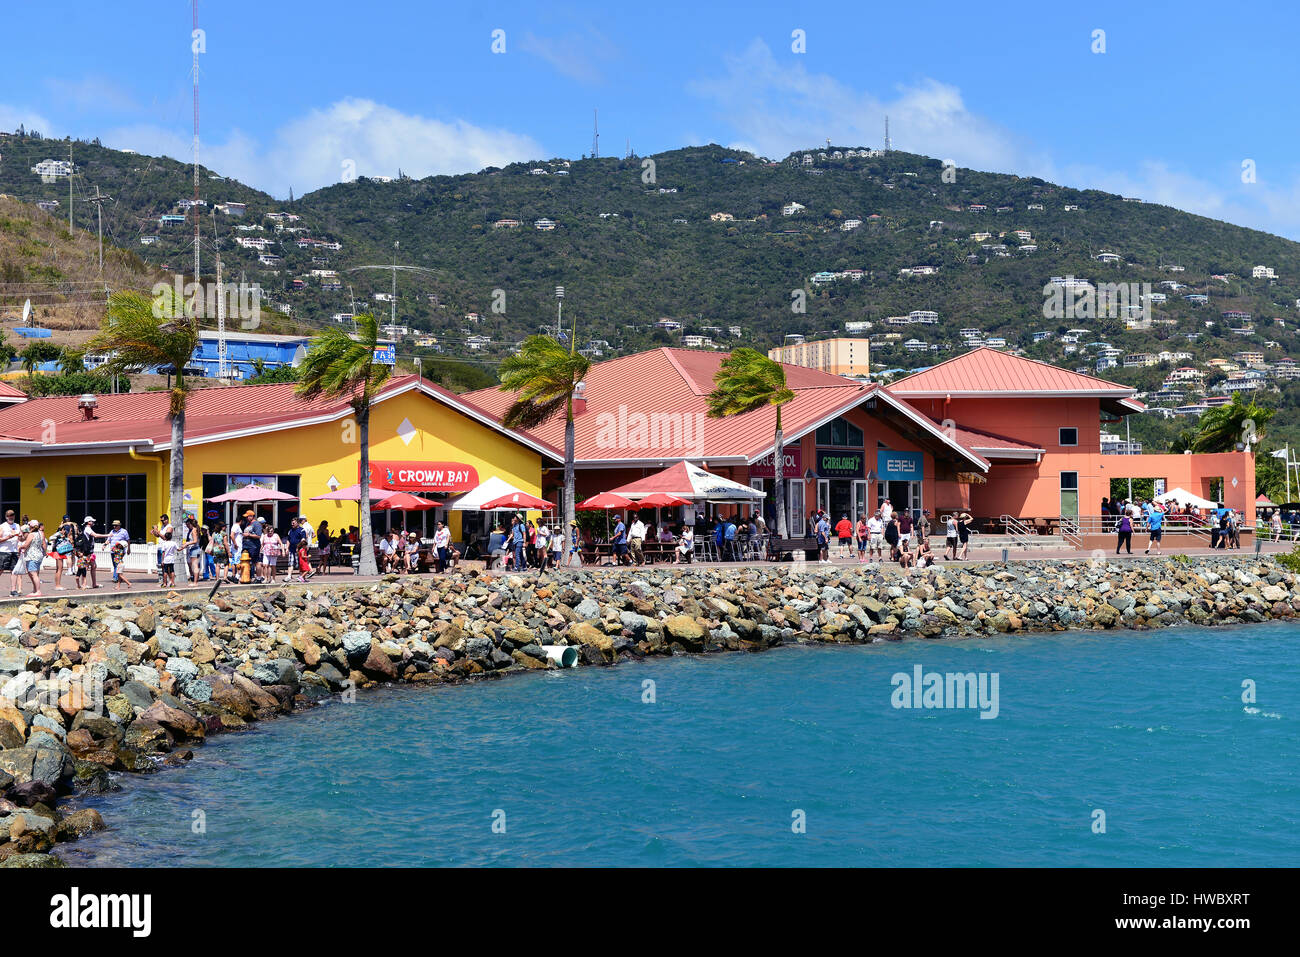 St. Thomas, US Virgin Islands - March 1, 2017:  The Crown Bay Center offers shopping, gaming, food, beverages and is located nearby cruise ship docks Stock Photo